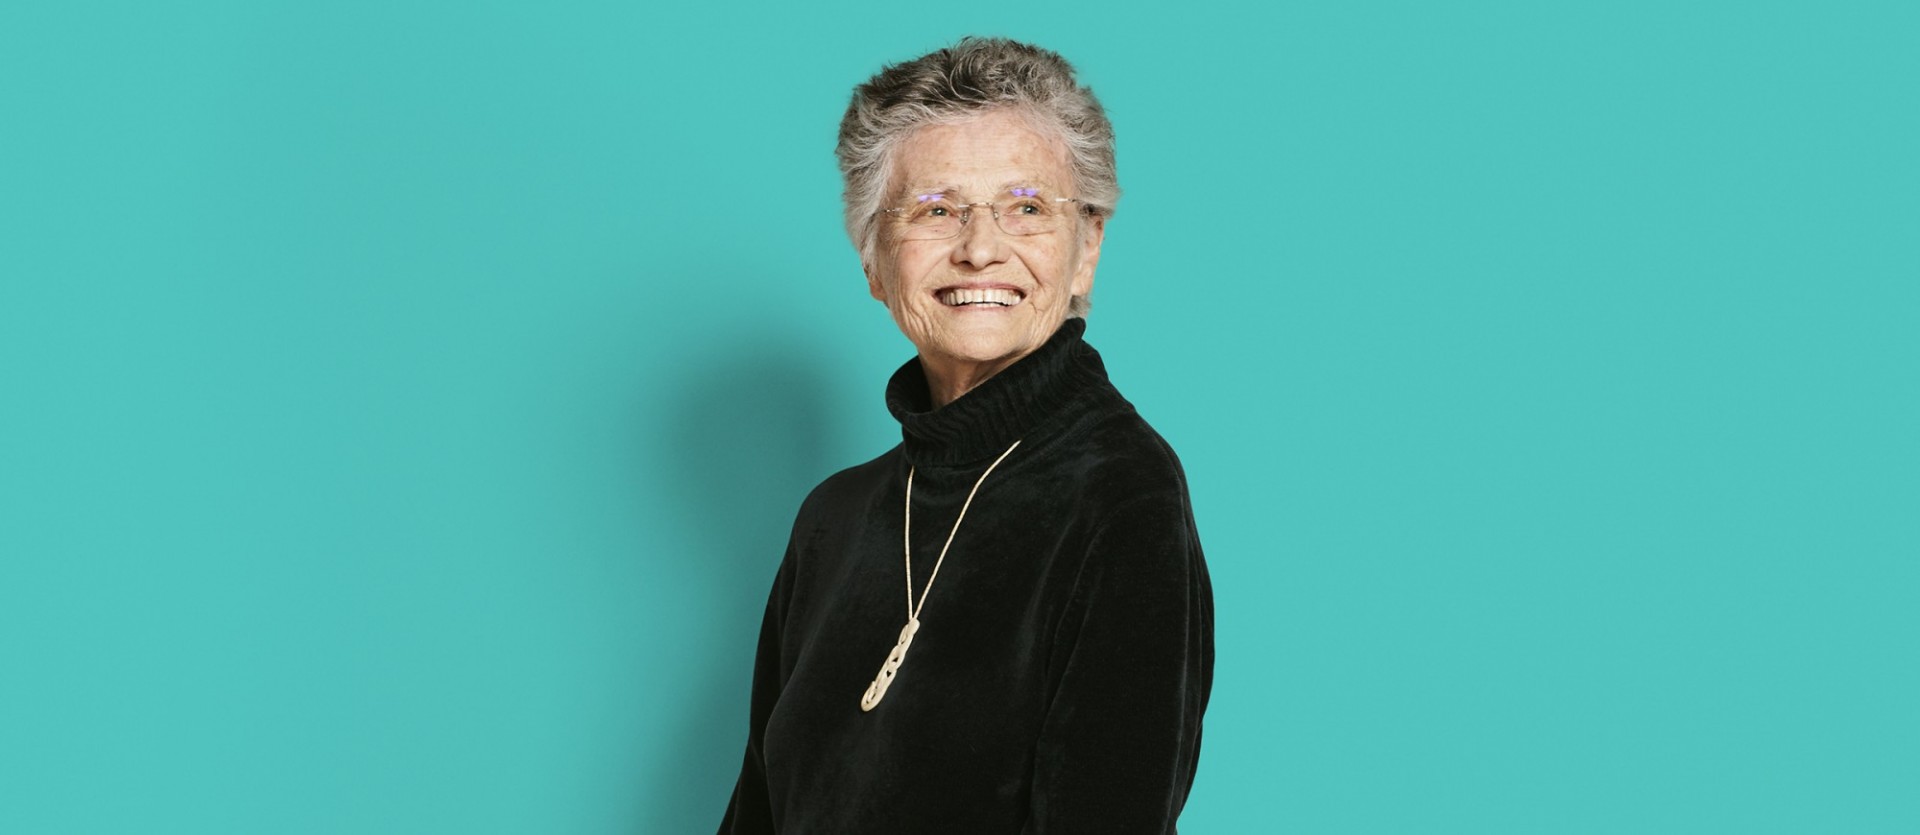 Musician Annea Lockwood: Woman with gray hair and glasses with black shirt with silver necklace in front of a turquoise-colored background.